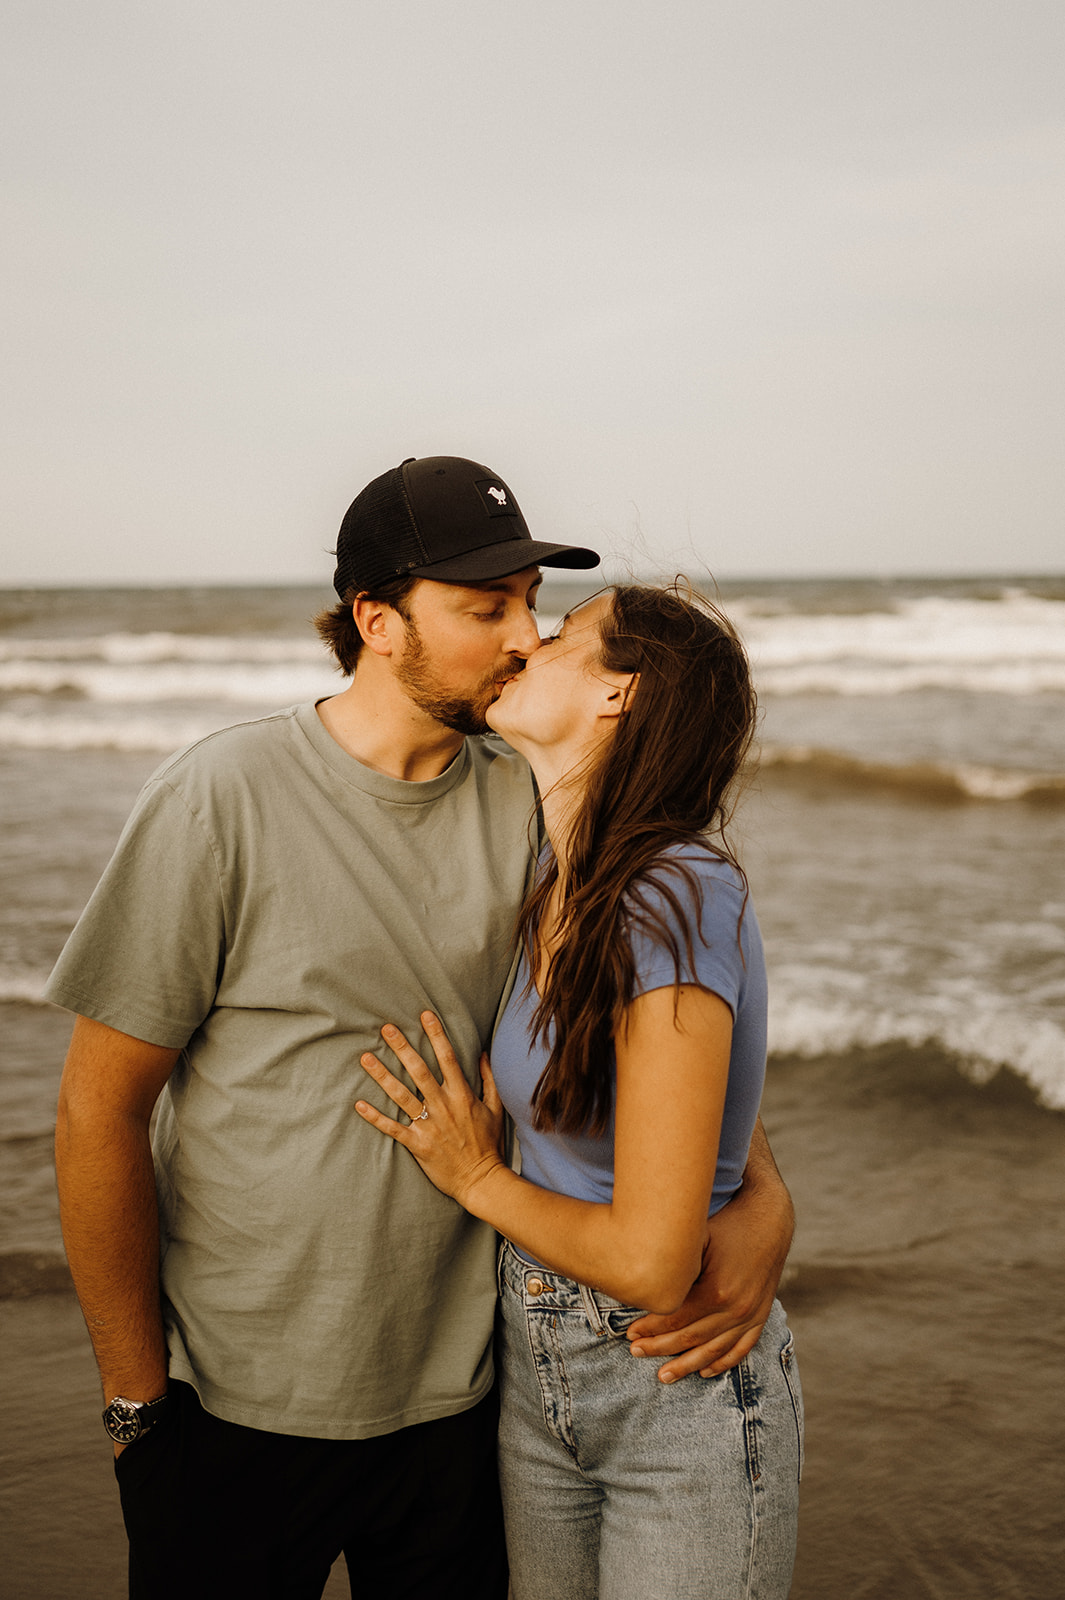 A man and woman kissing standing on the beach.